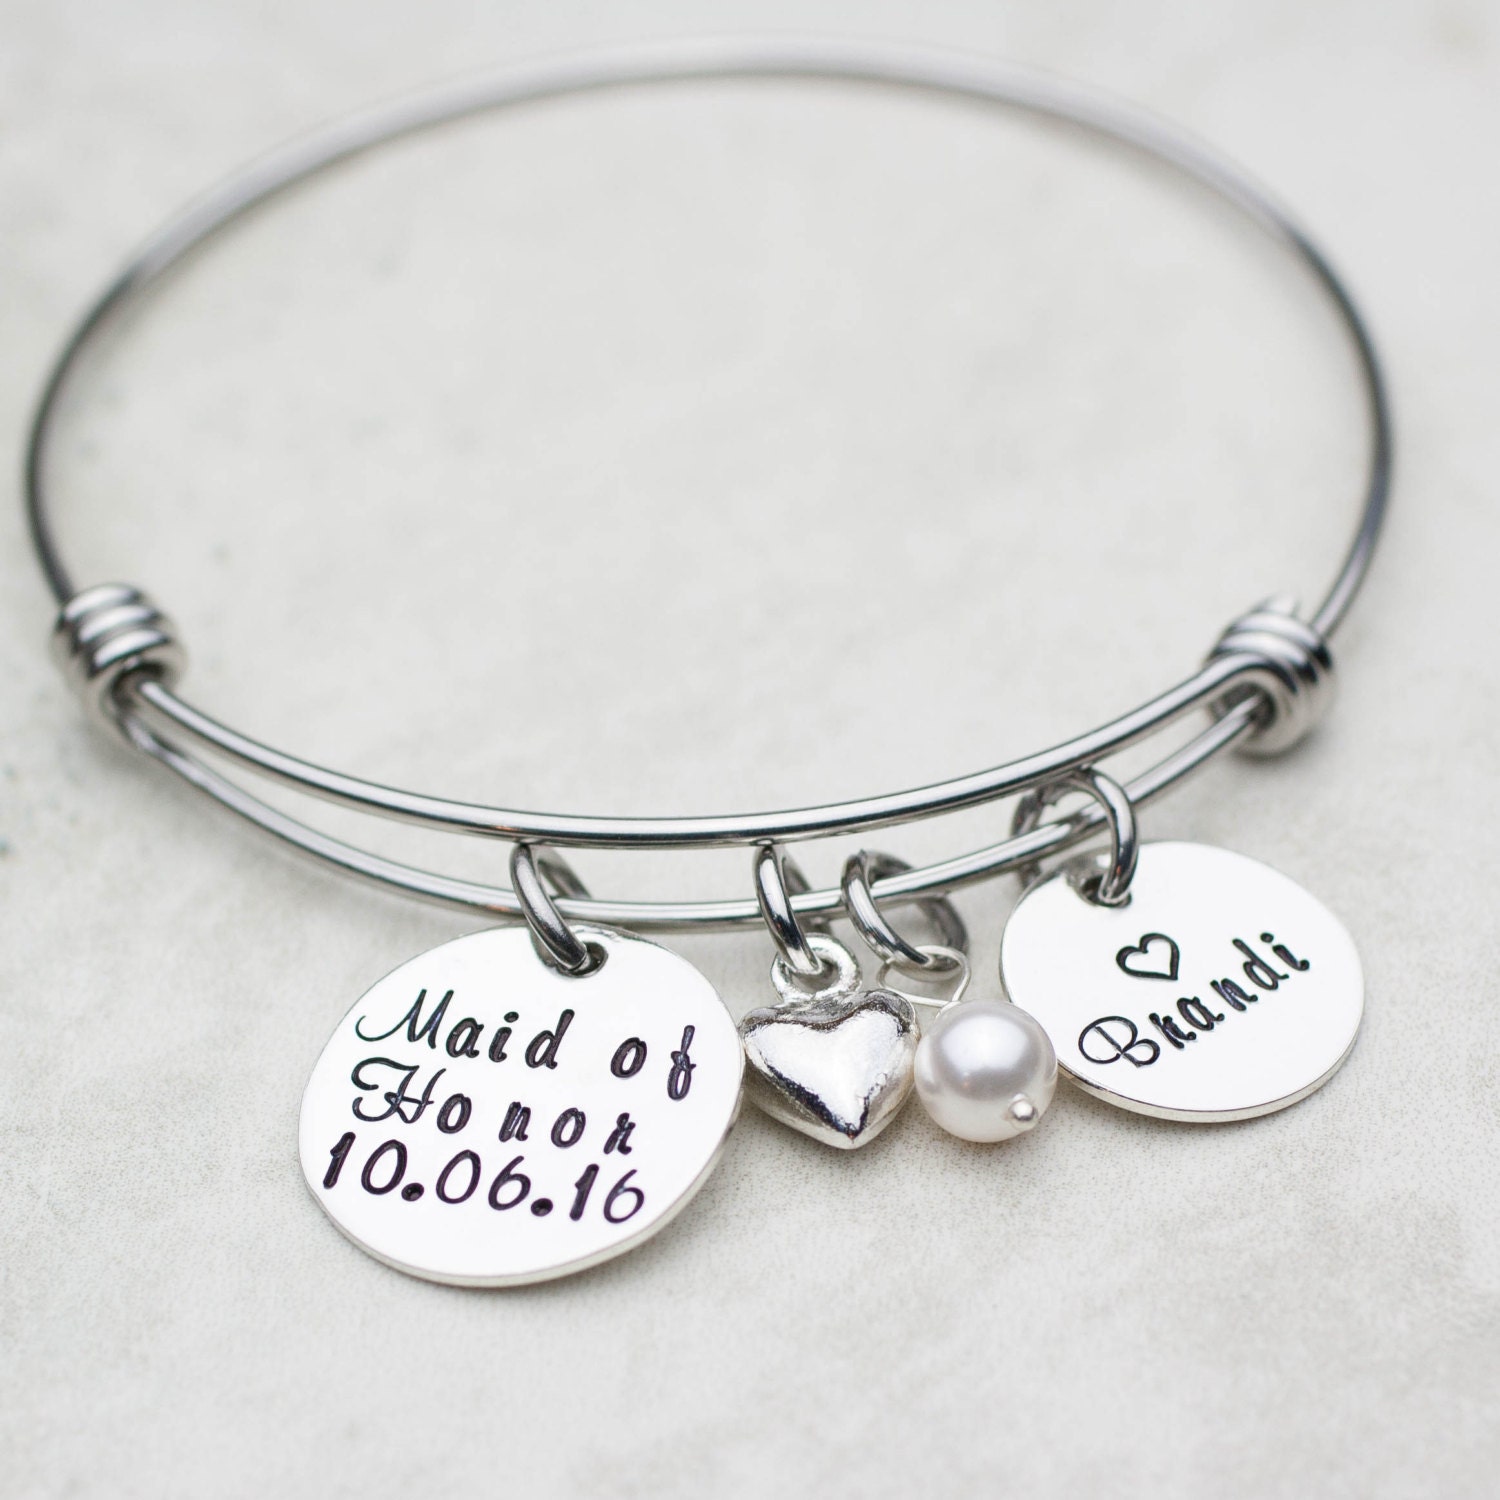 Personalized Wedding Custom Maid of Honor Jewelry, Maid of Honor Gift, Bridesmaids, Hand Stamped Bangle Bracelet, Matron of Honor Gift